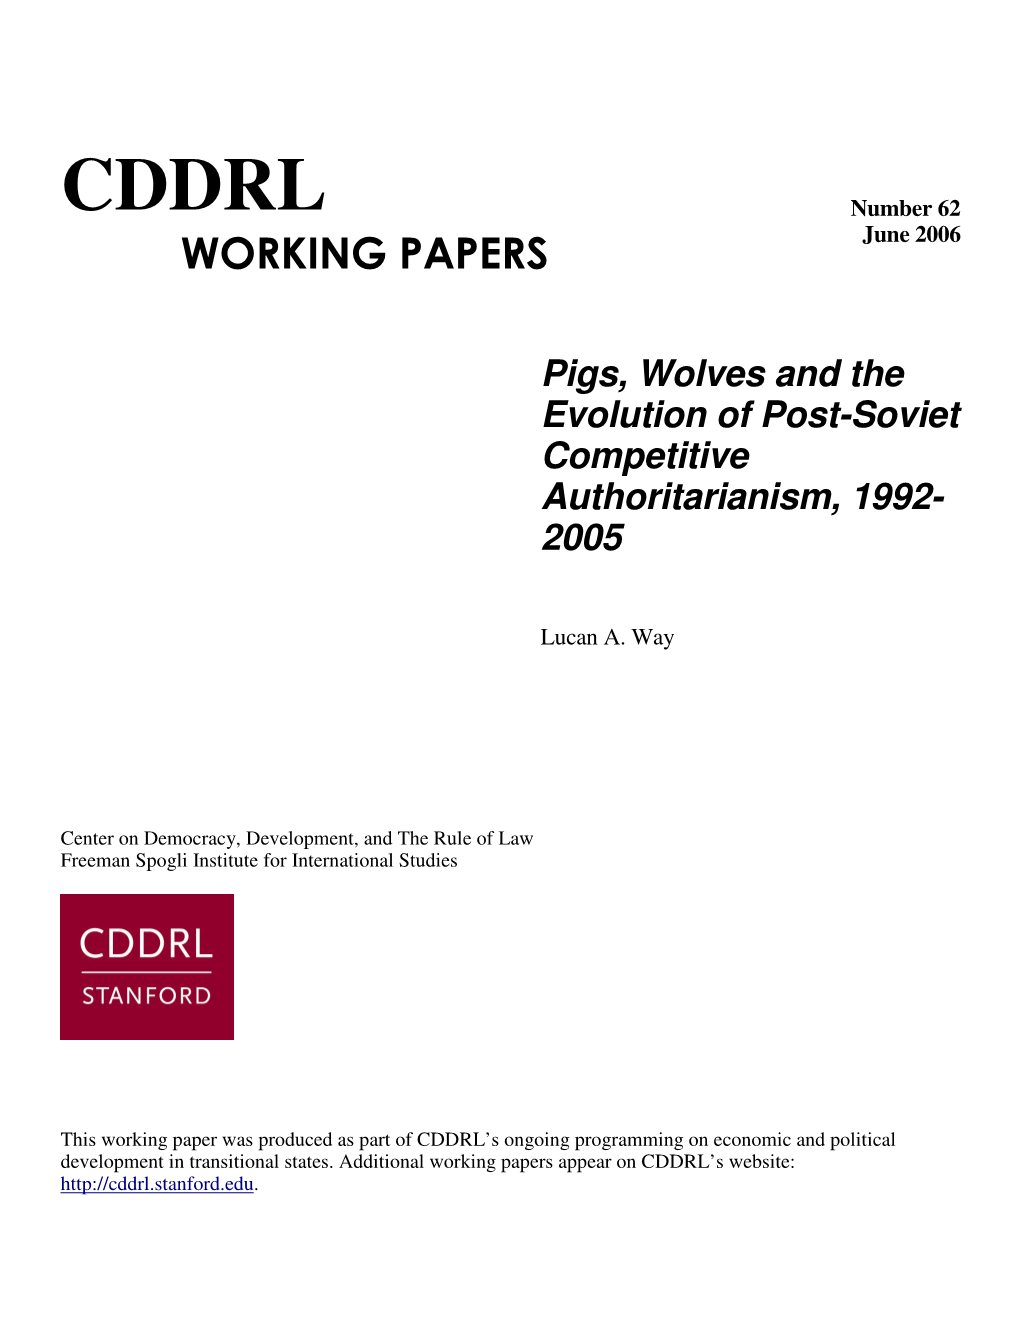 CDDRL Number 62 WORKING PAPERS June 2006